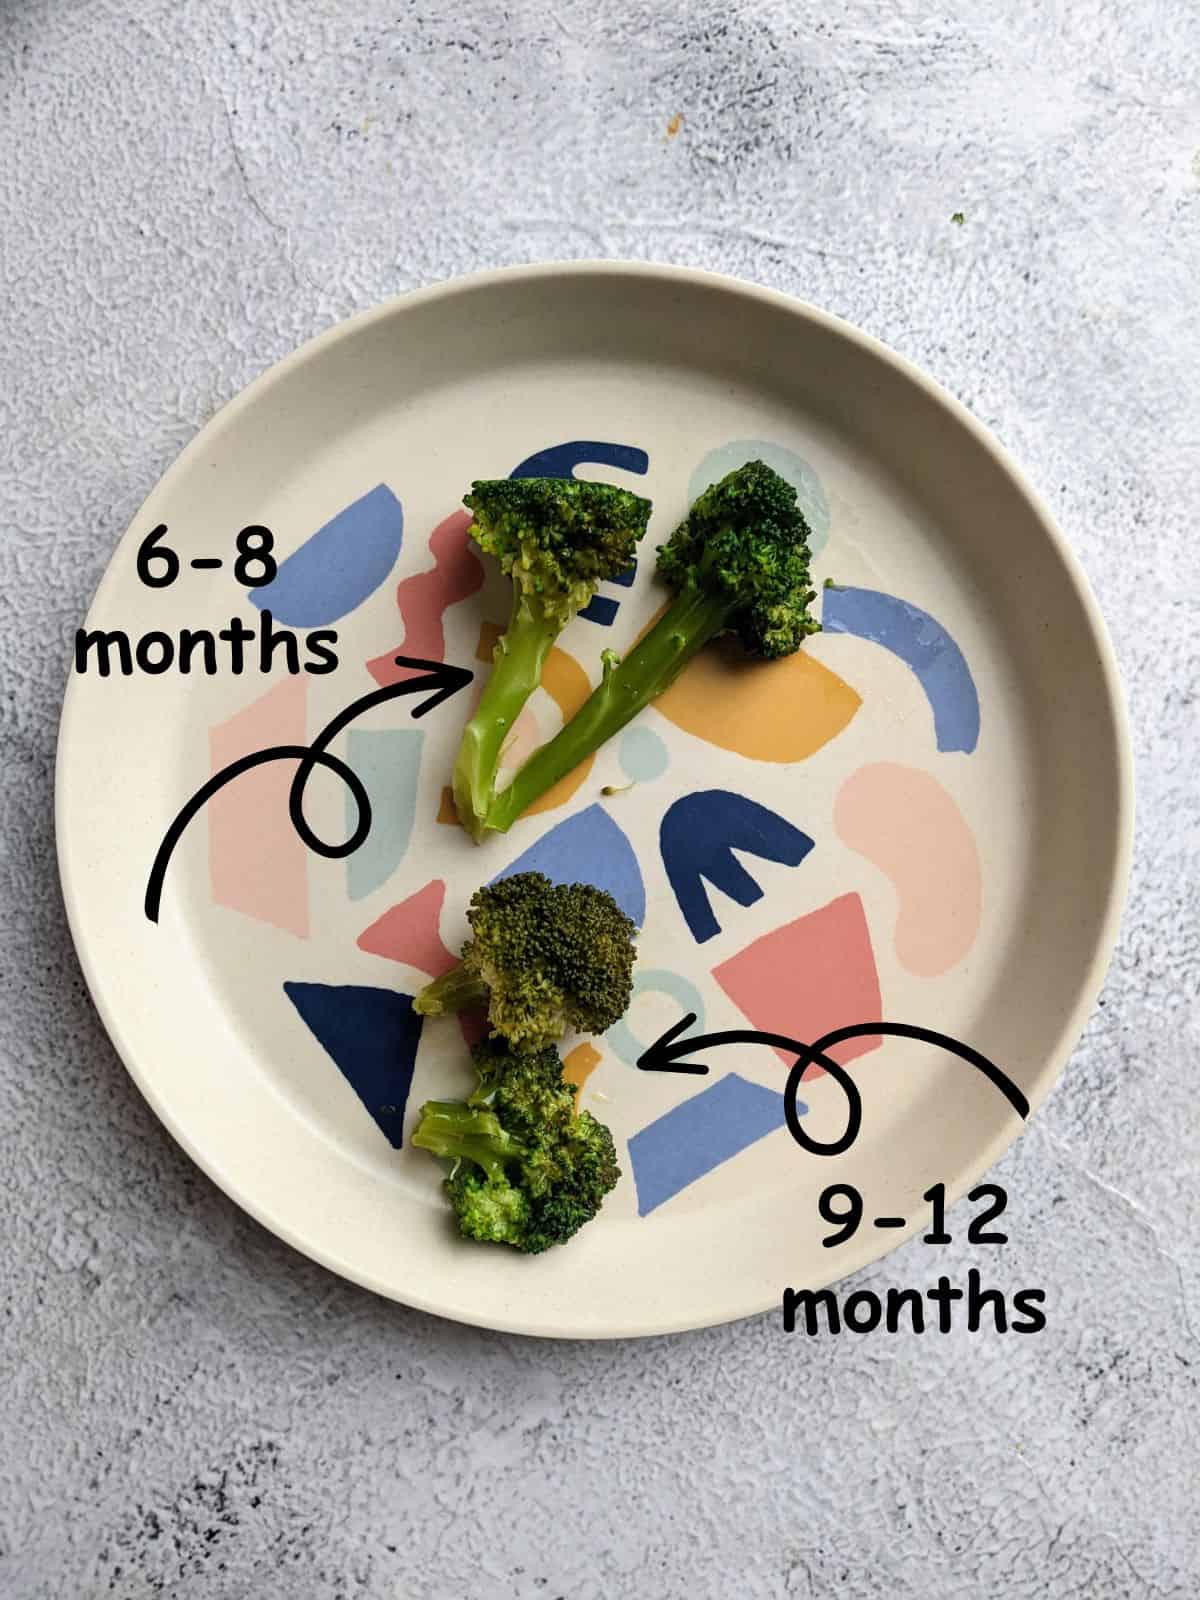 How to offer broccoli to babies based on age.